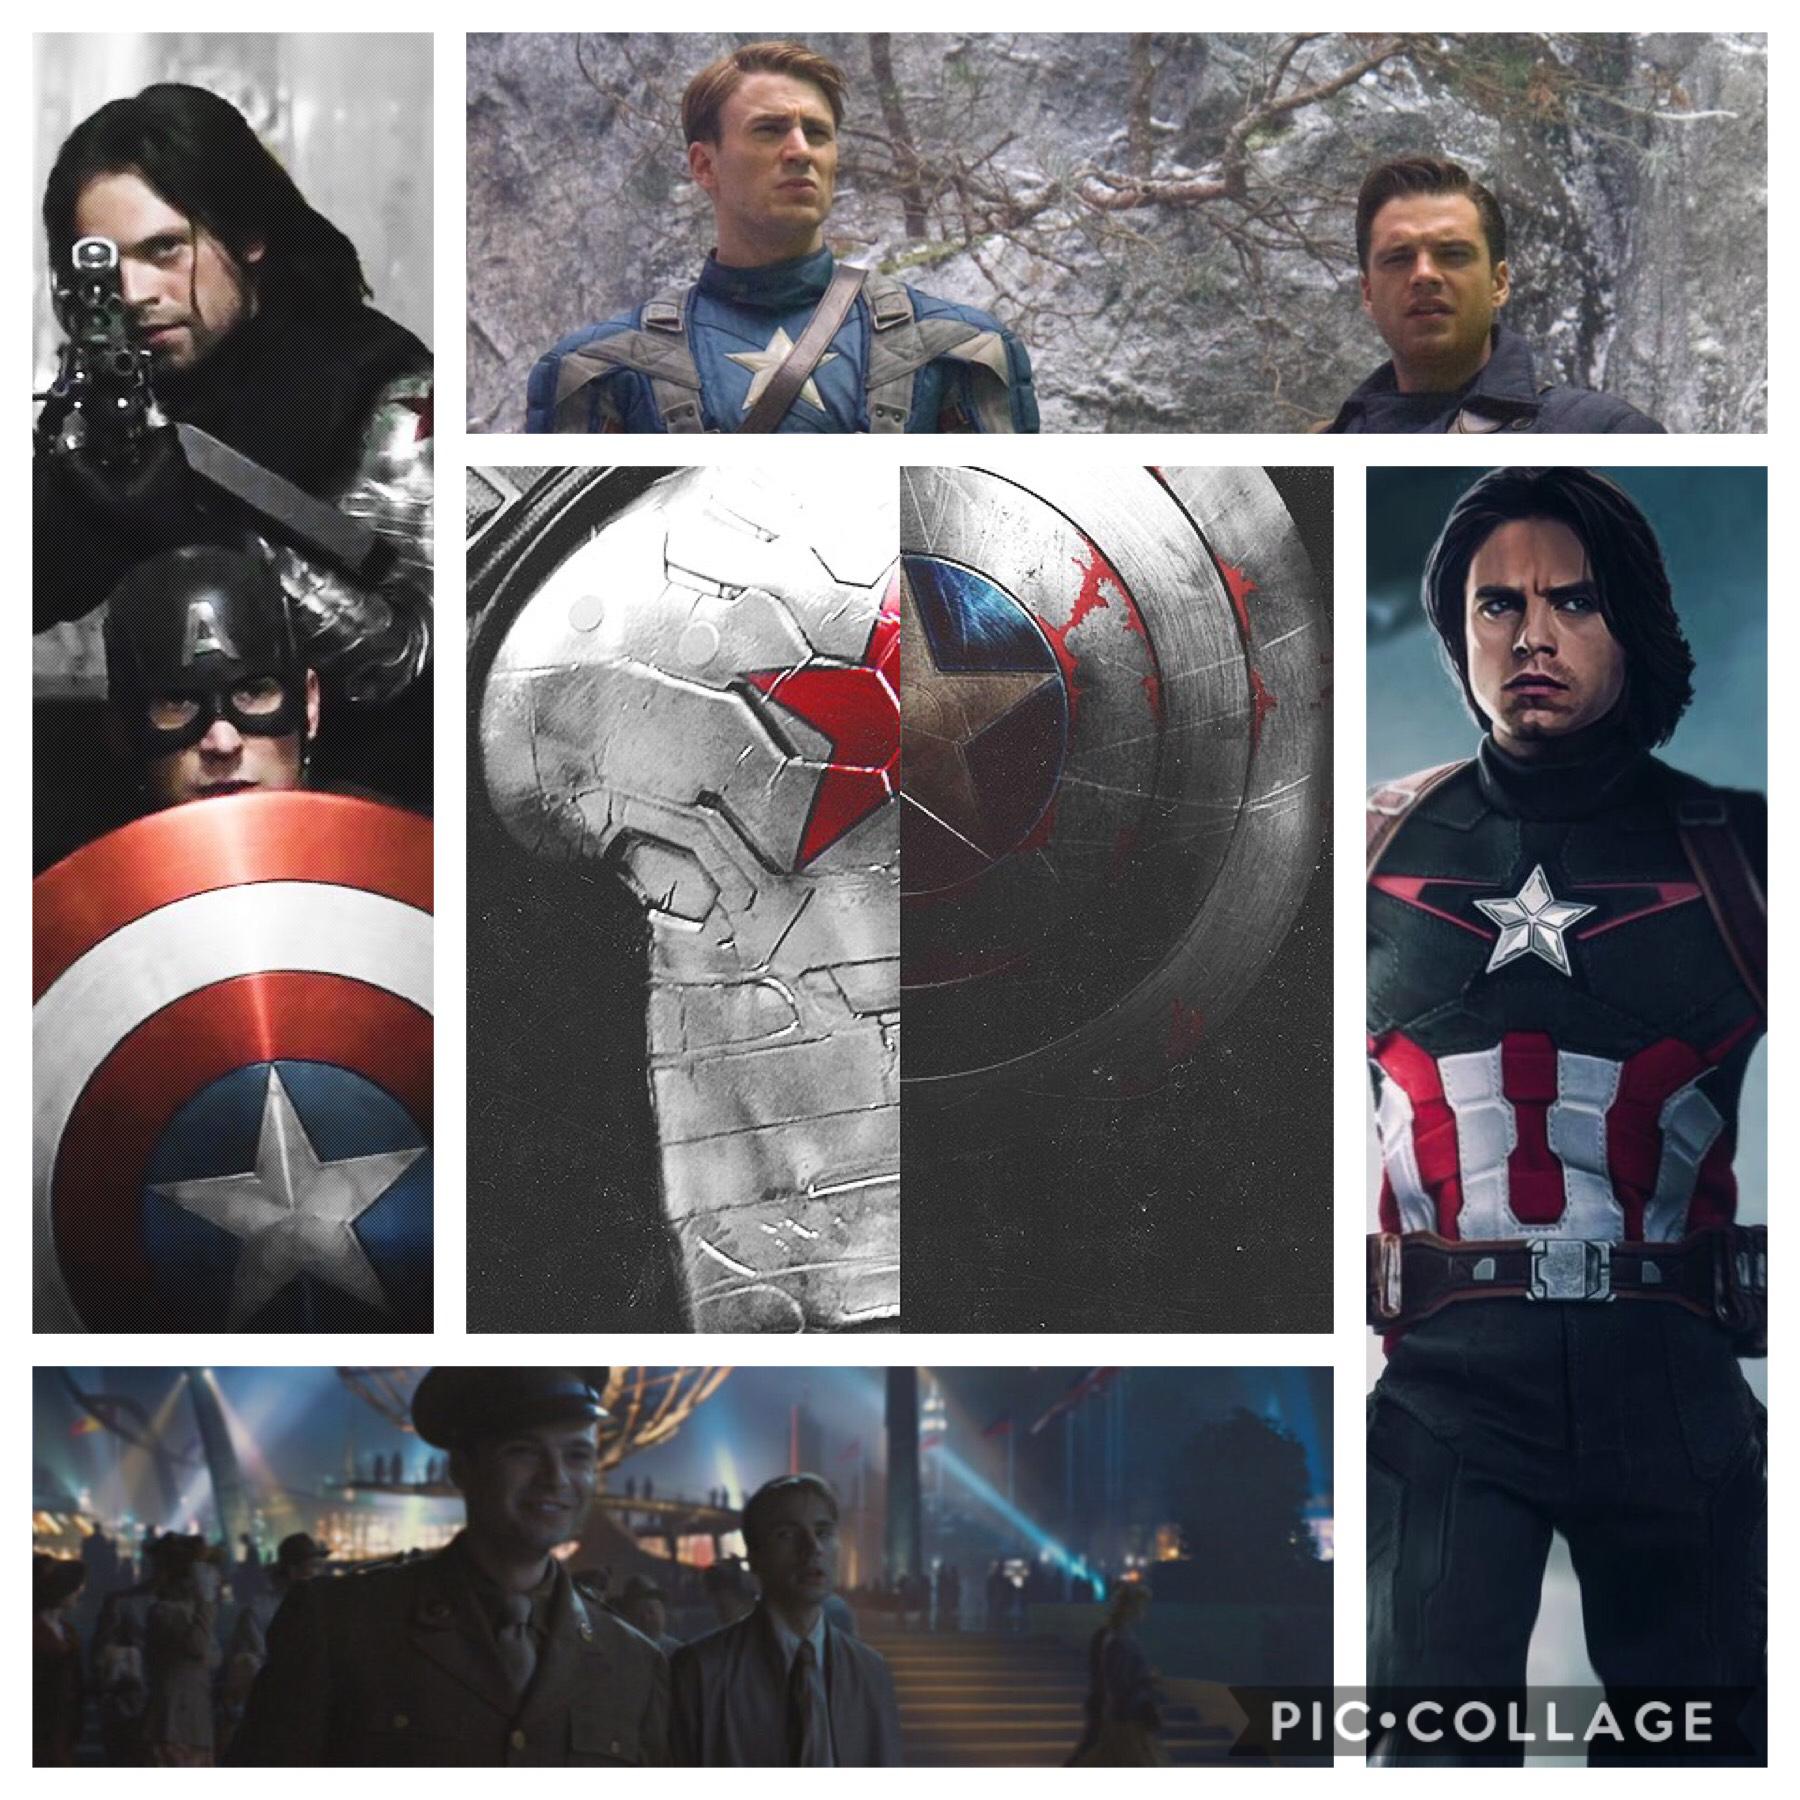                    🇺🇸🇺🇸🇺🇸
Made a whole bunch of MCU collages but I think this one’s my favorite❤️